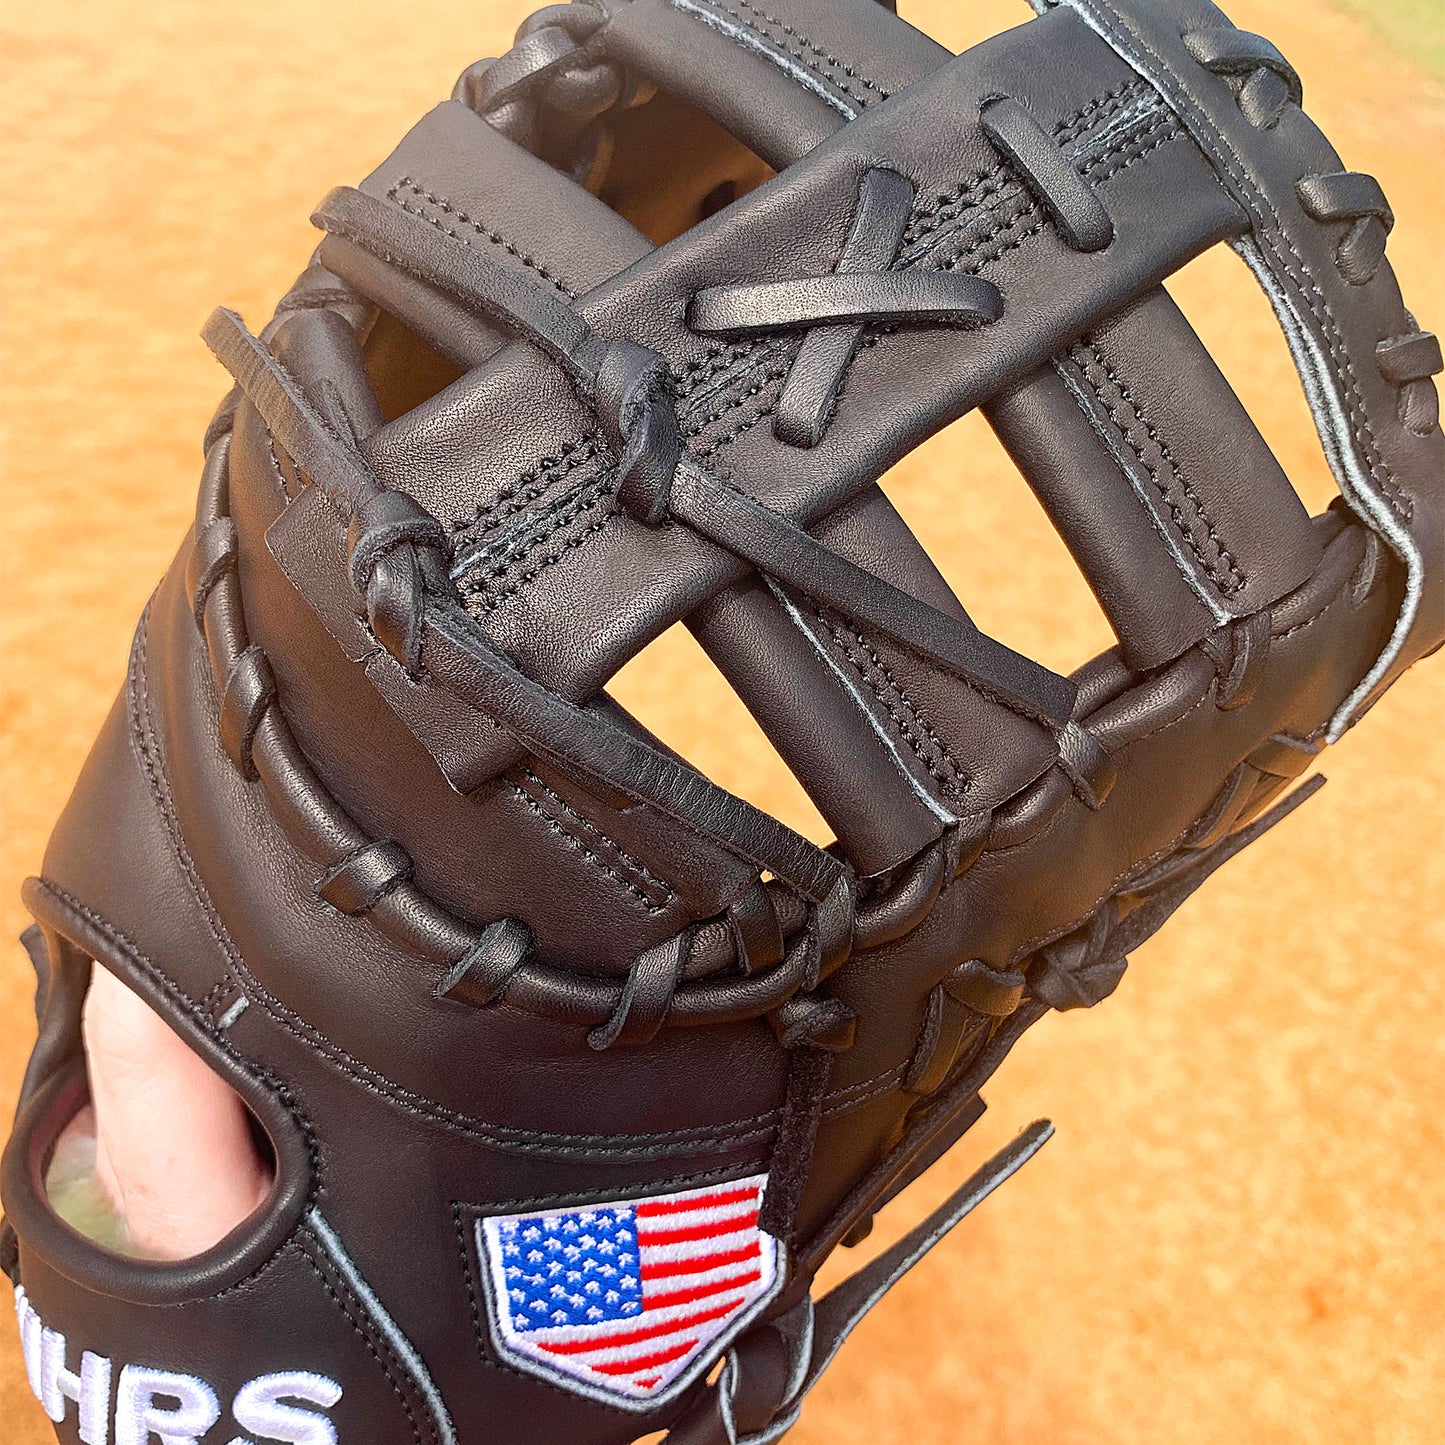 13" Baseball First Base Mitt - Black with Black Laces